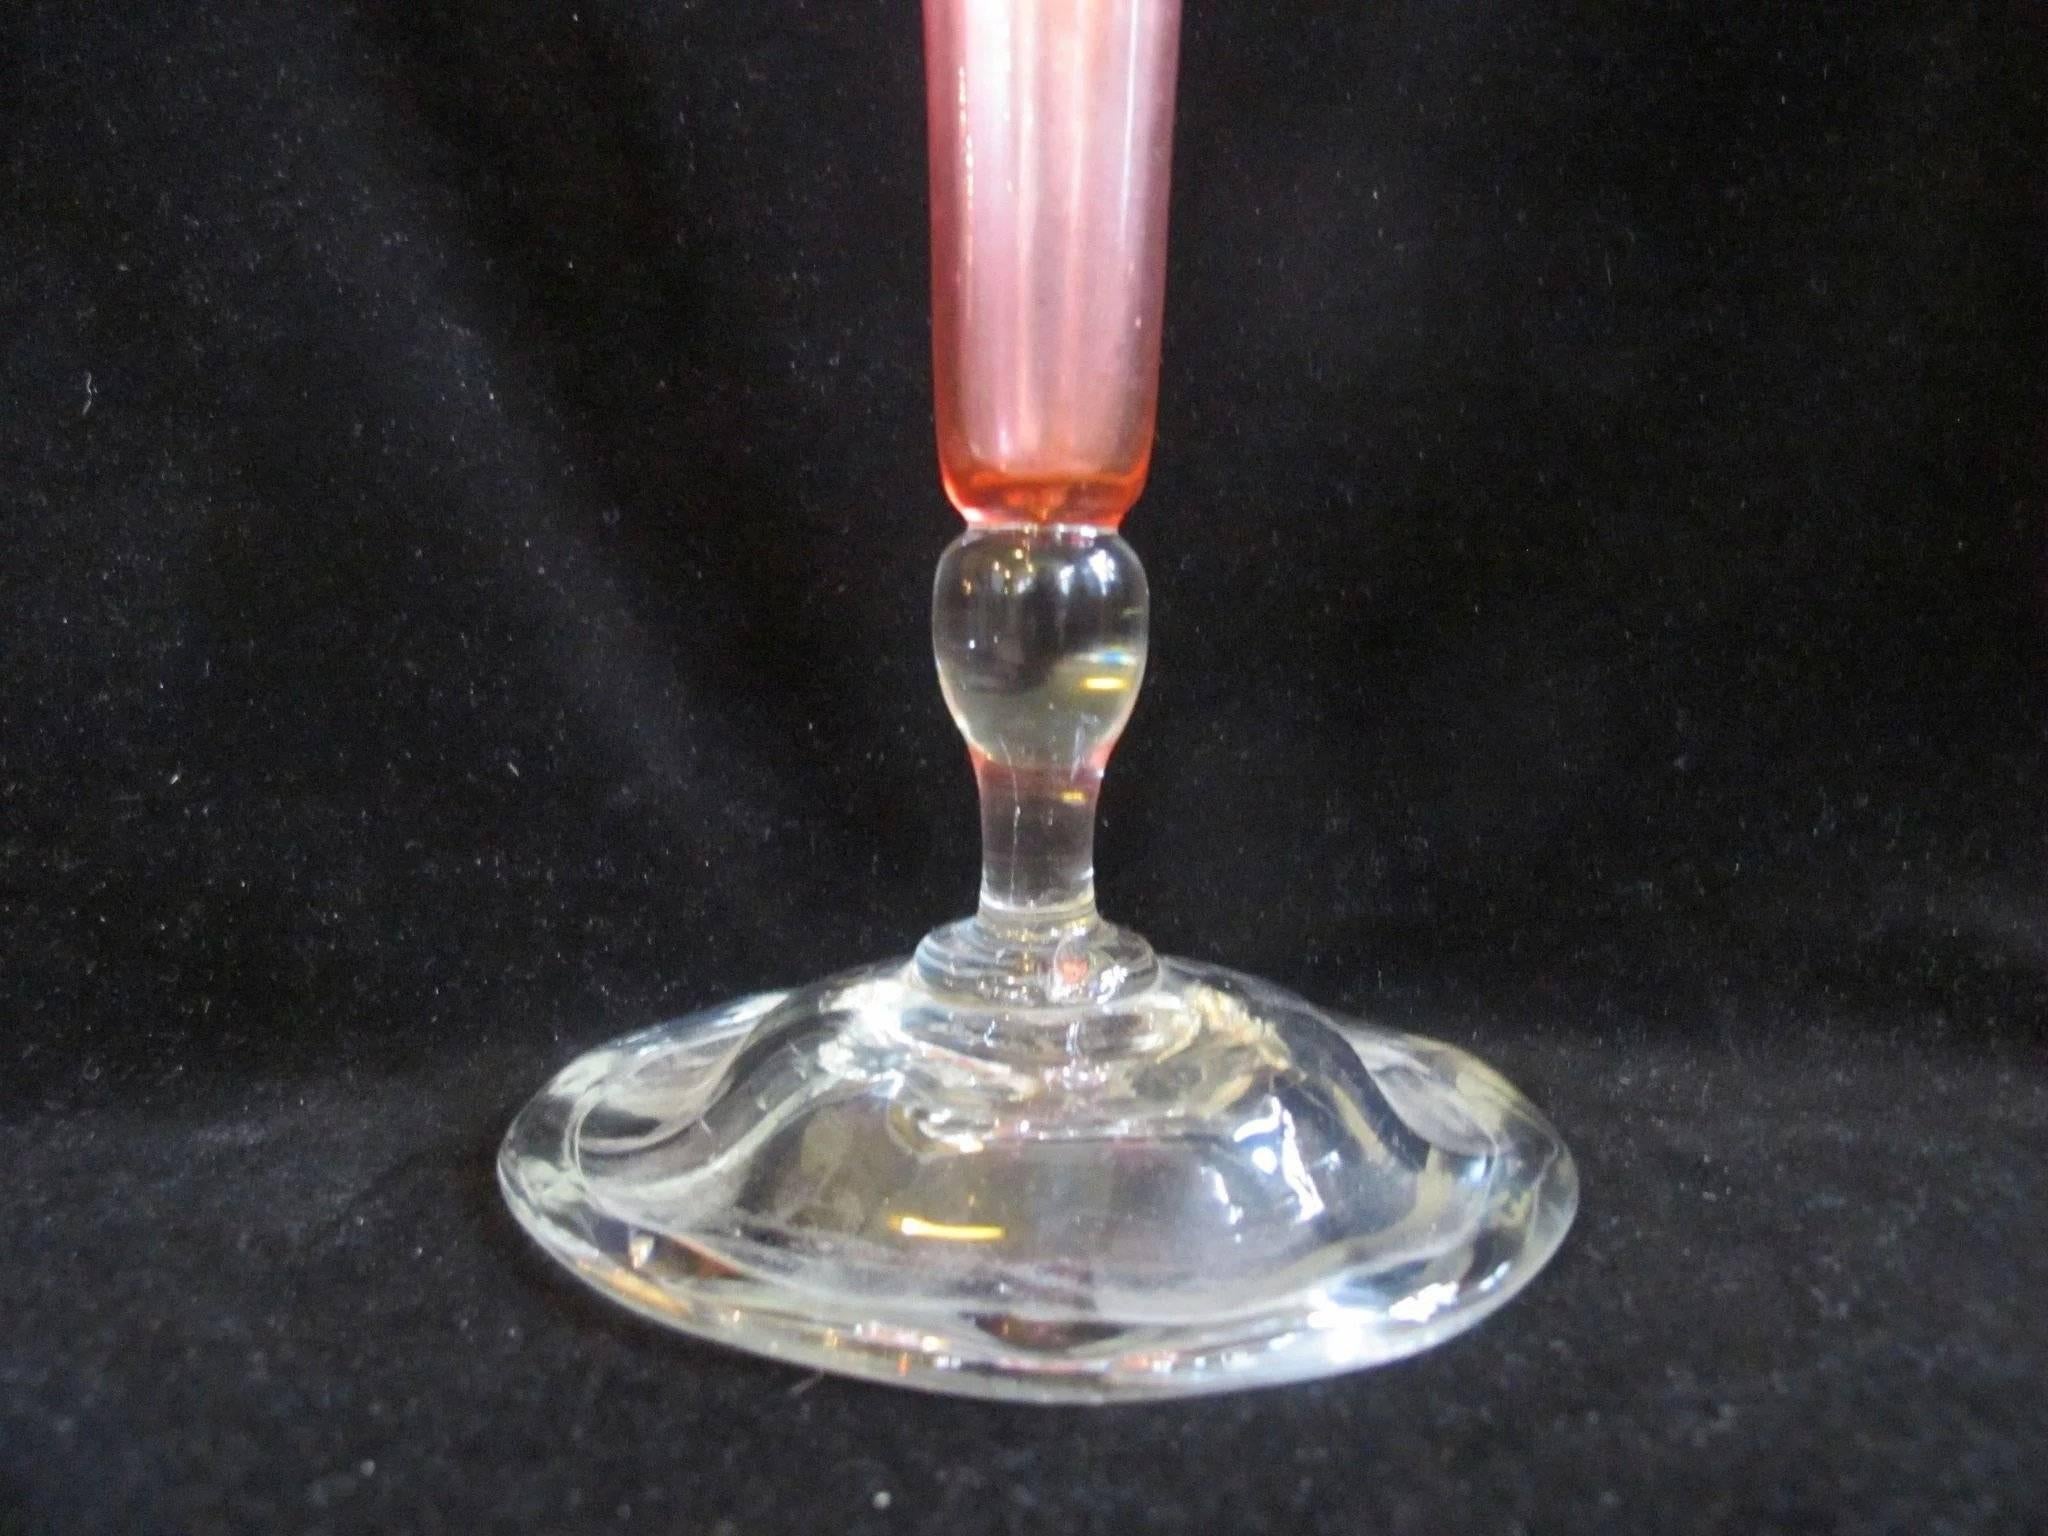 A trumpet shape with a wide flaring rim, tapering to a long slender body on applied clear cushion foot. Pink iridescence shades from slightly gold at the edge of the rim to purple and blue in the body, depending on how the light hits vase. It's an